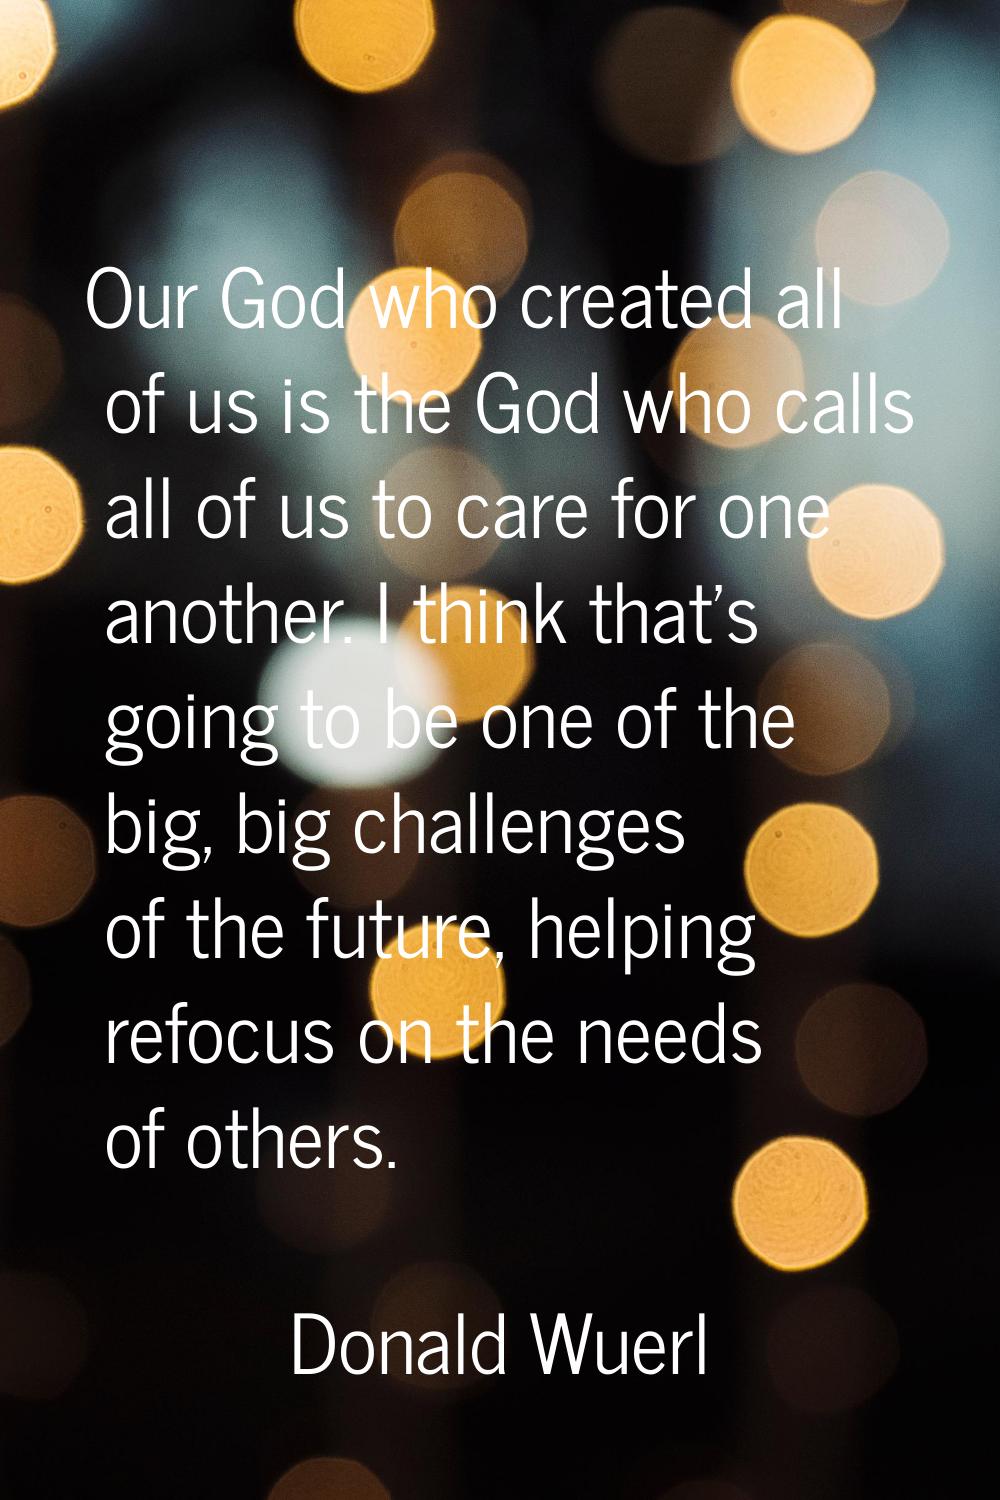 Our God who created all of us is the God who calls all of us to care for one another. I think that'